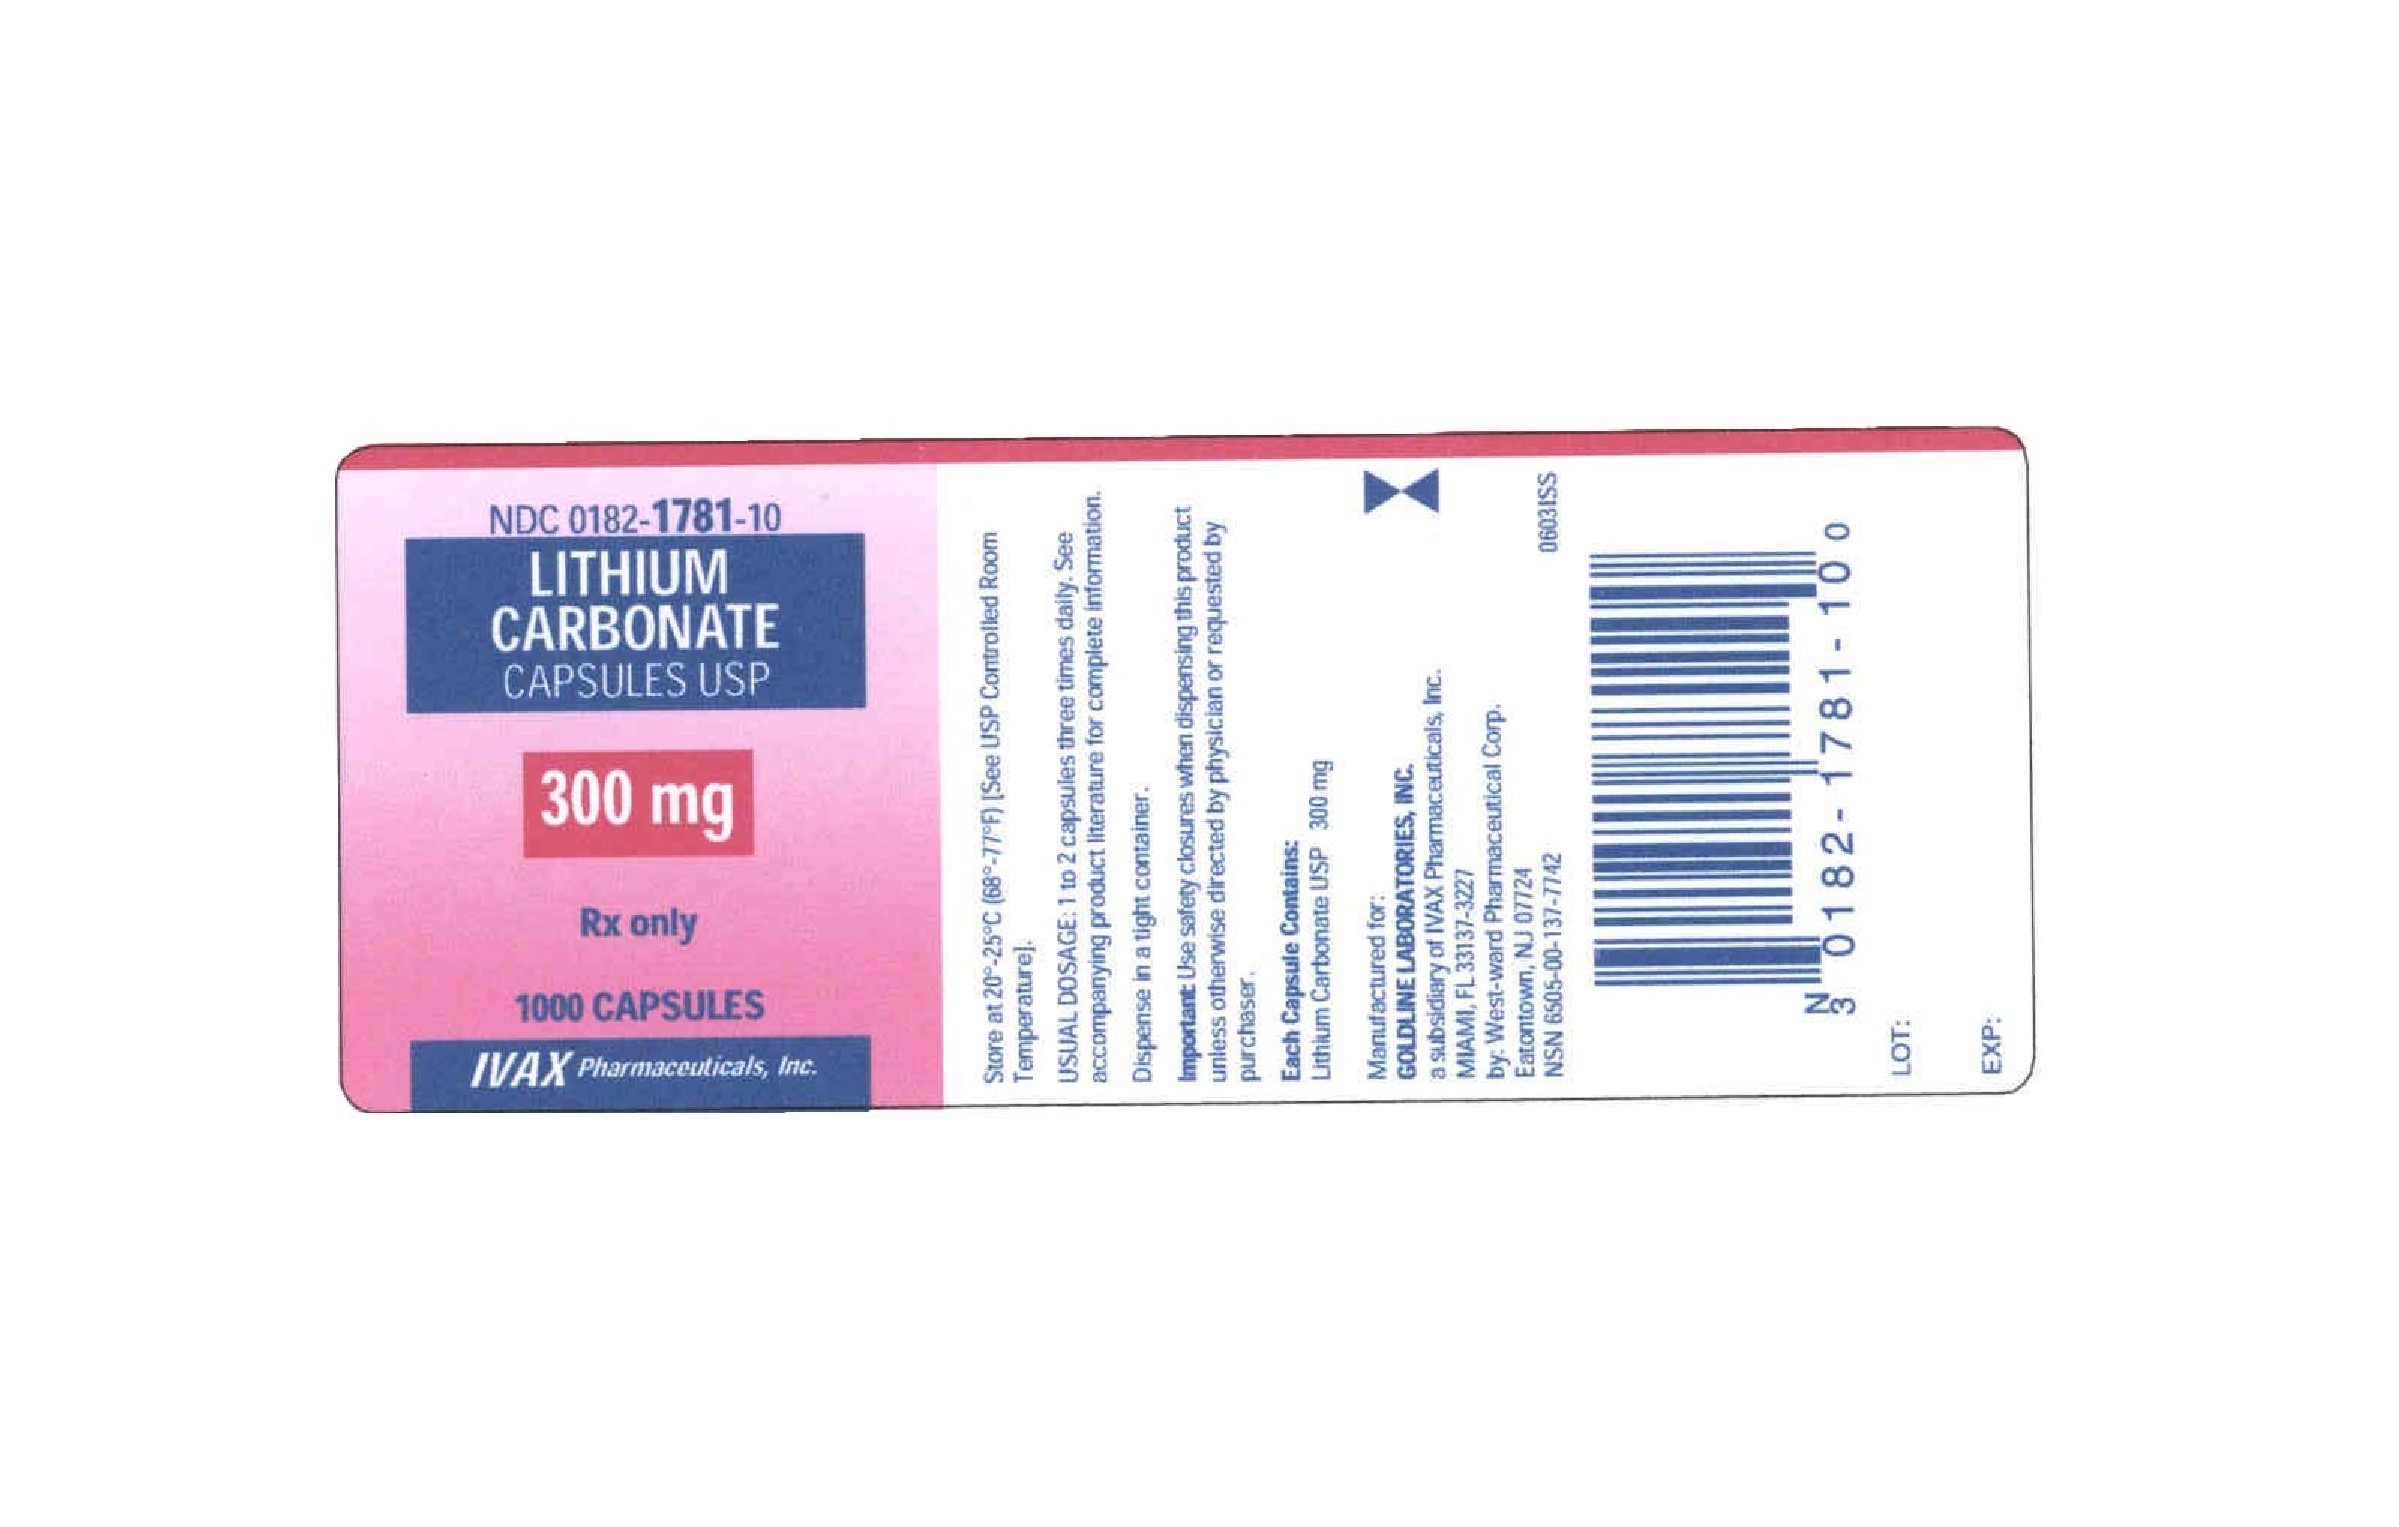 Image of 300 mg - 1000 Capsules Label